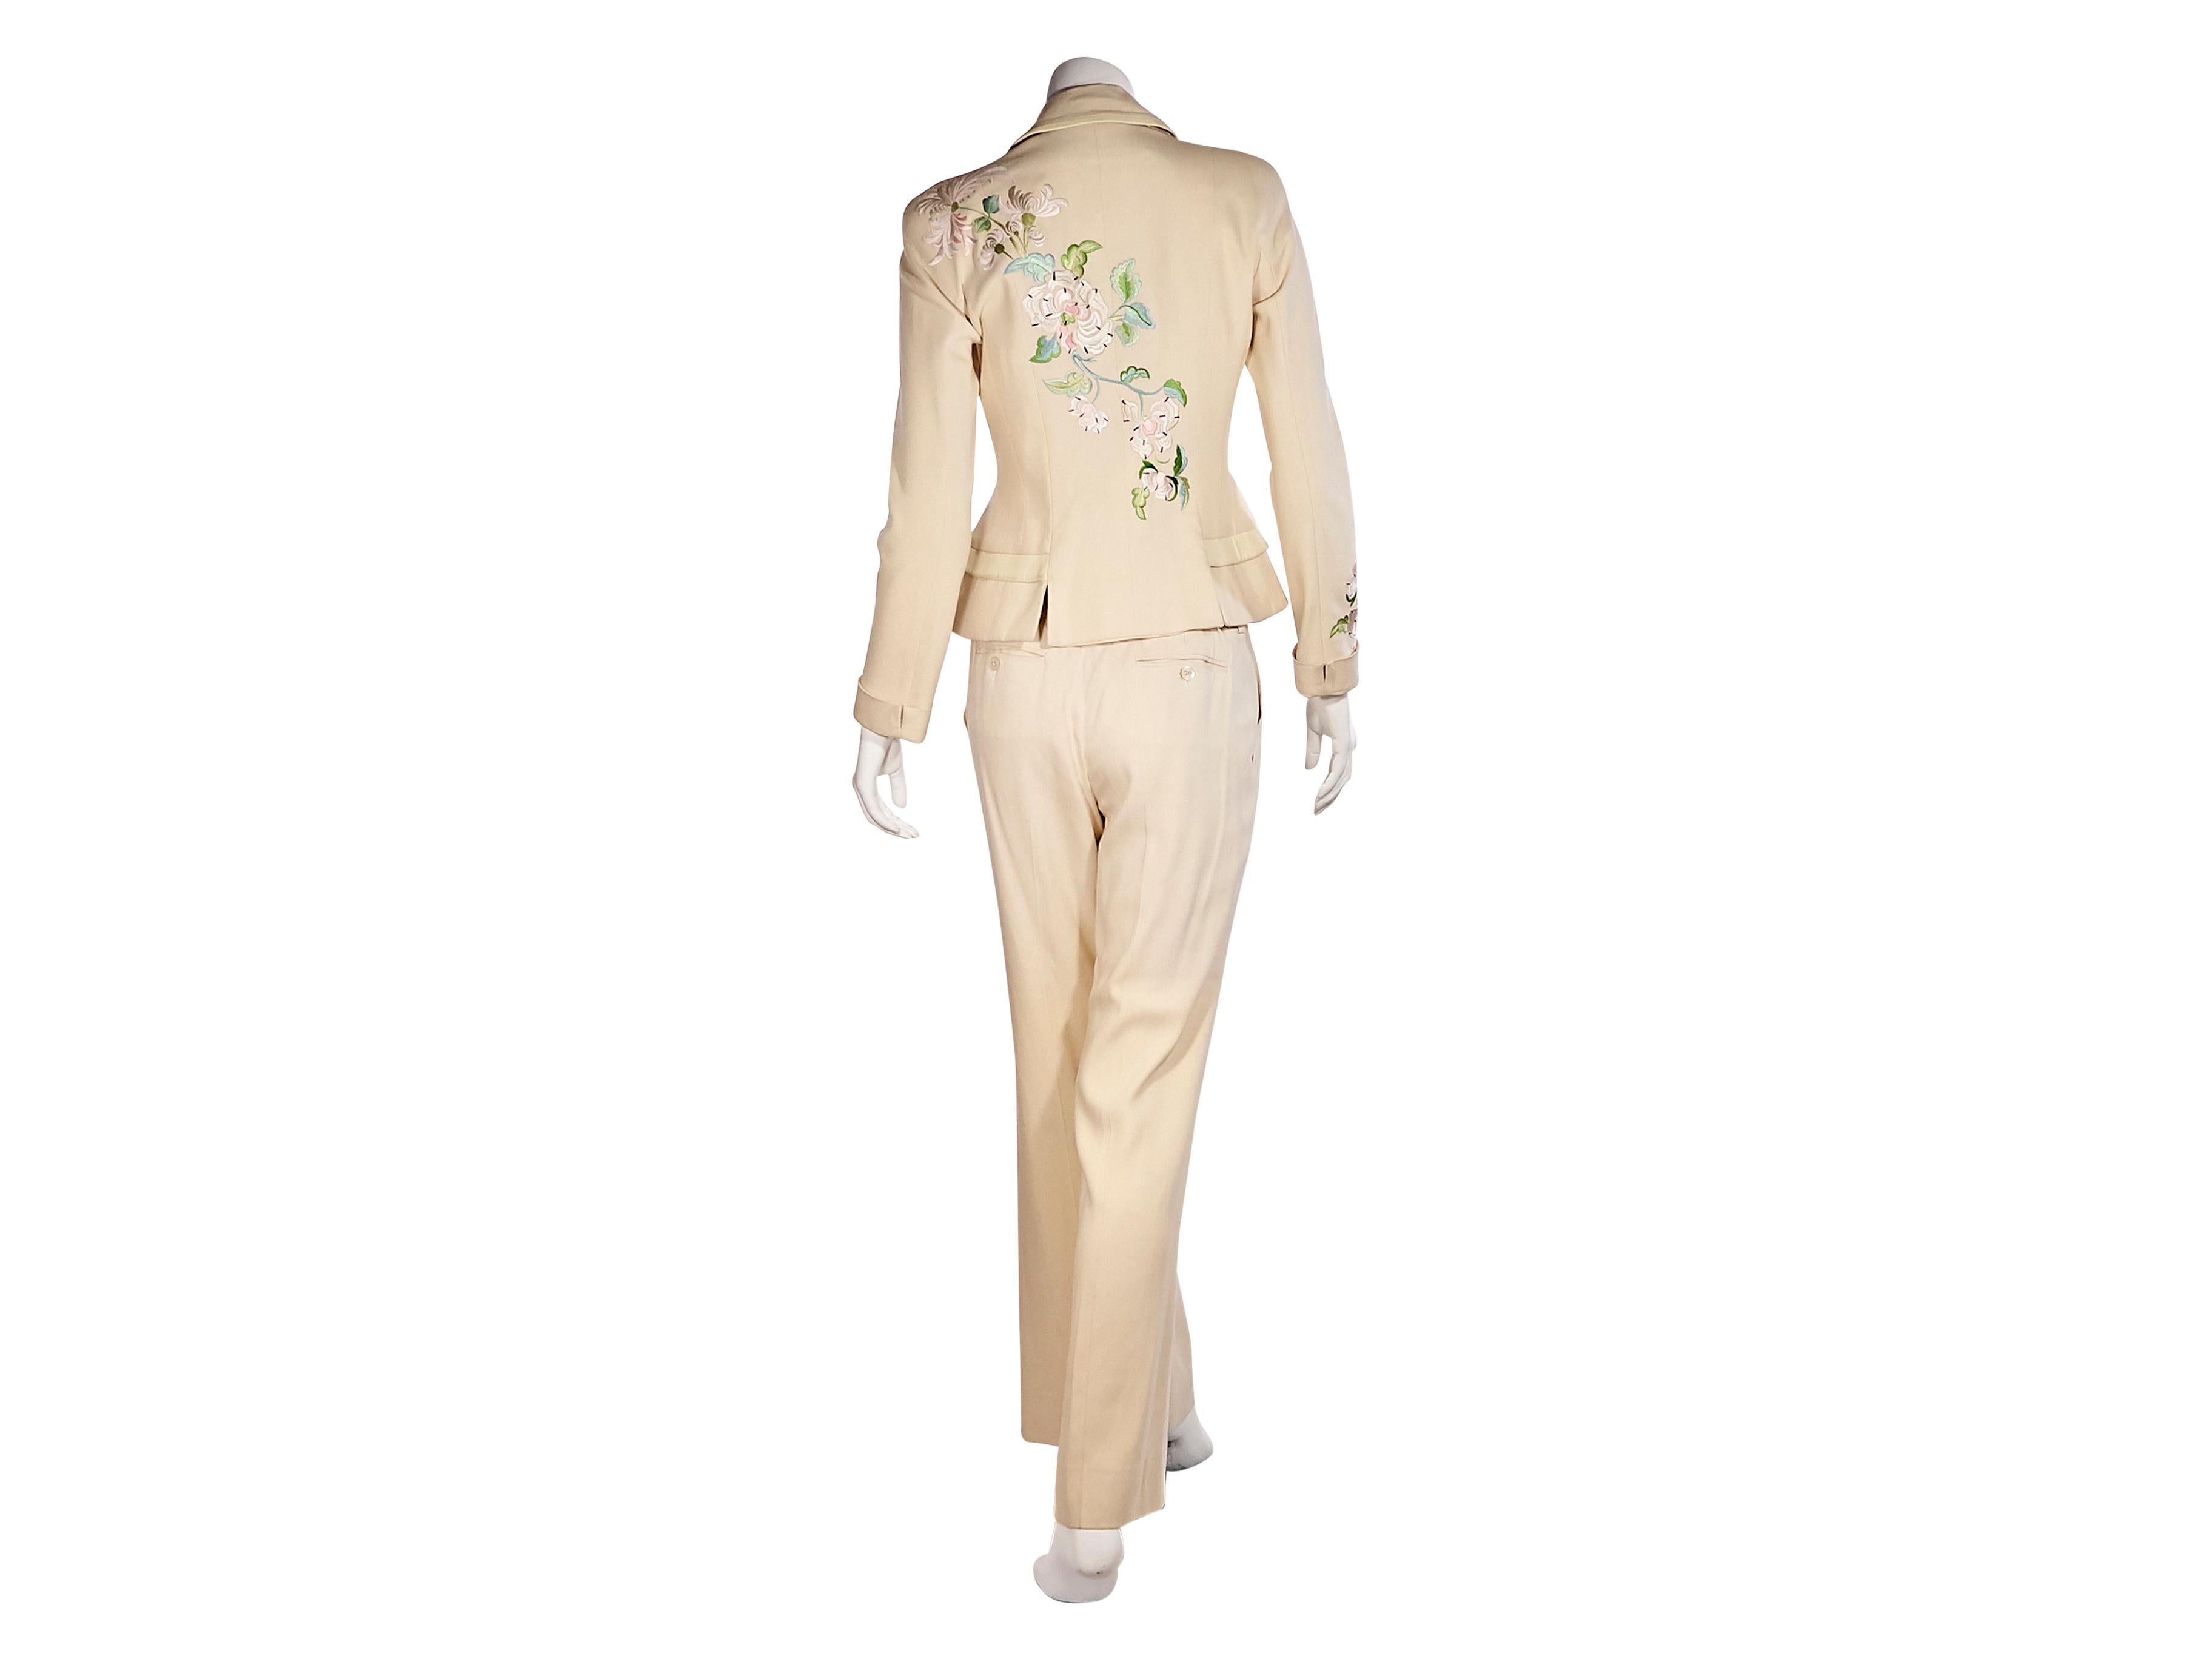 Beige Christian Dior Silk Cream Floral-Embroidered Suit